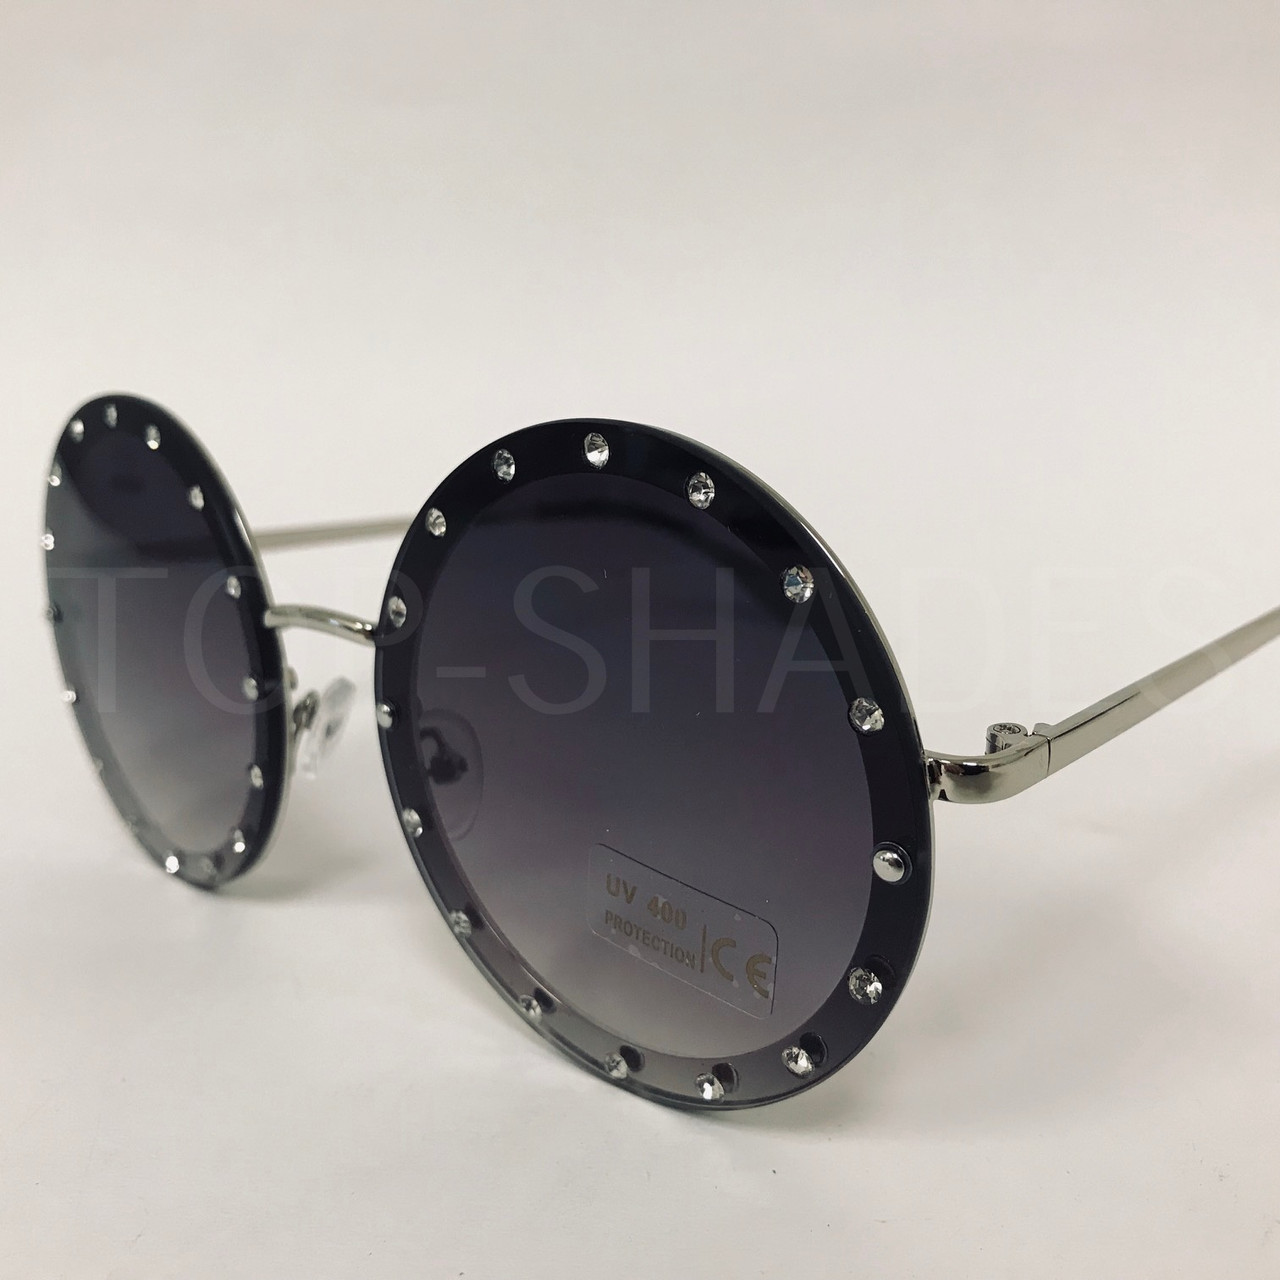 Rodeo Queen Betty Women's Fashion Sunglasses Black Frame w/ Bling